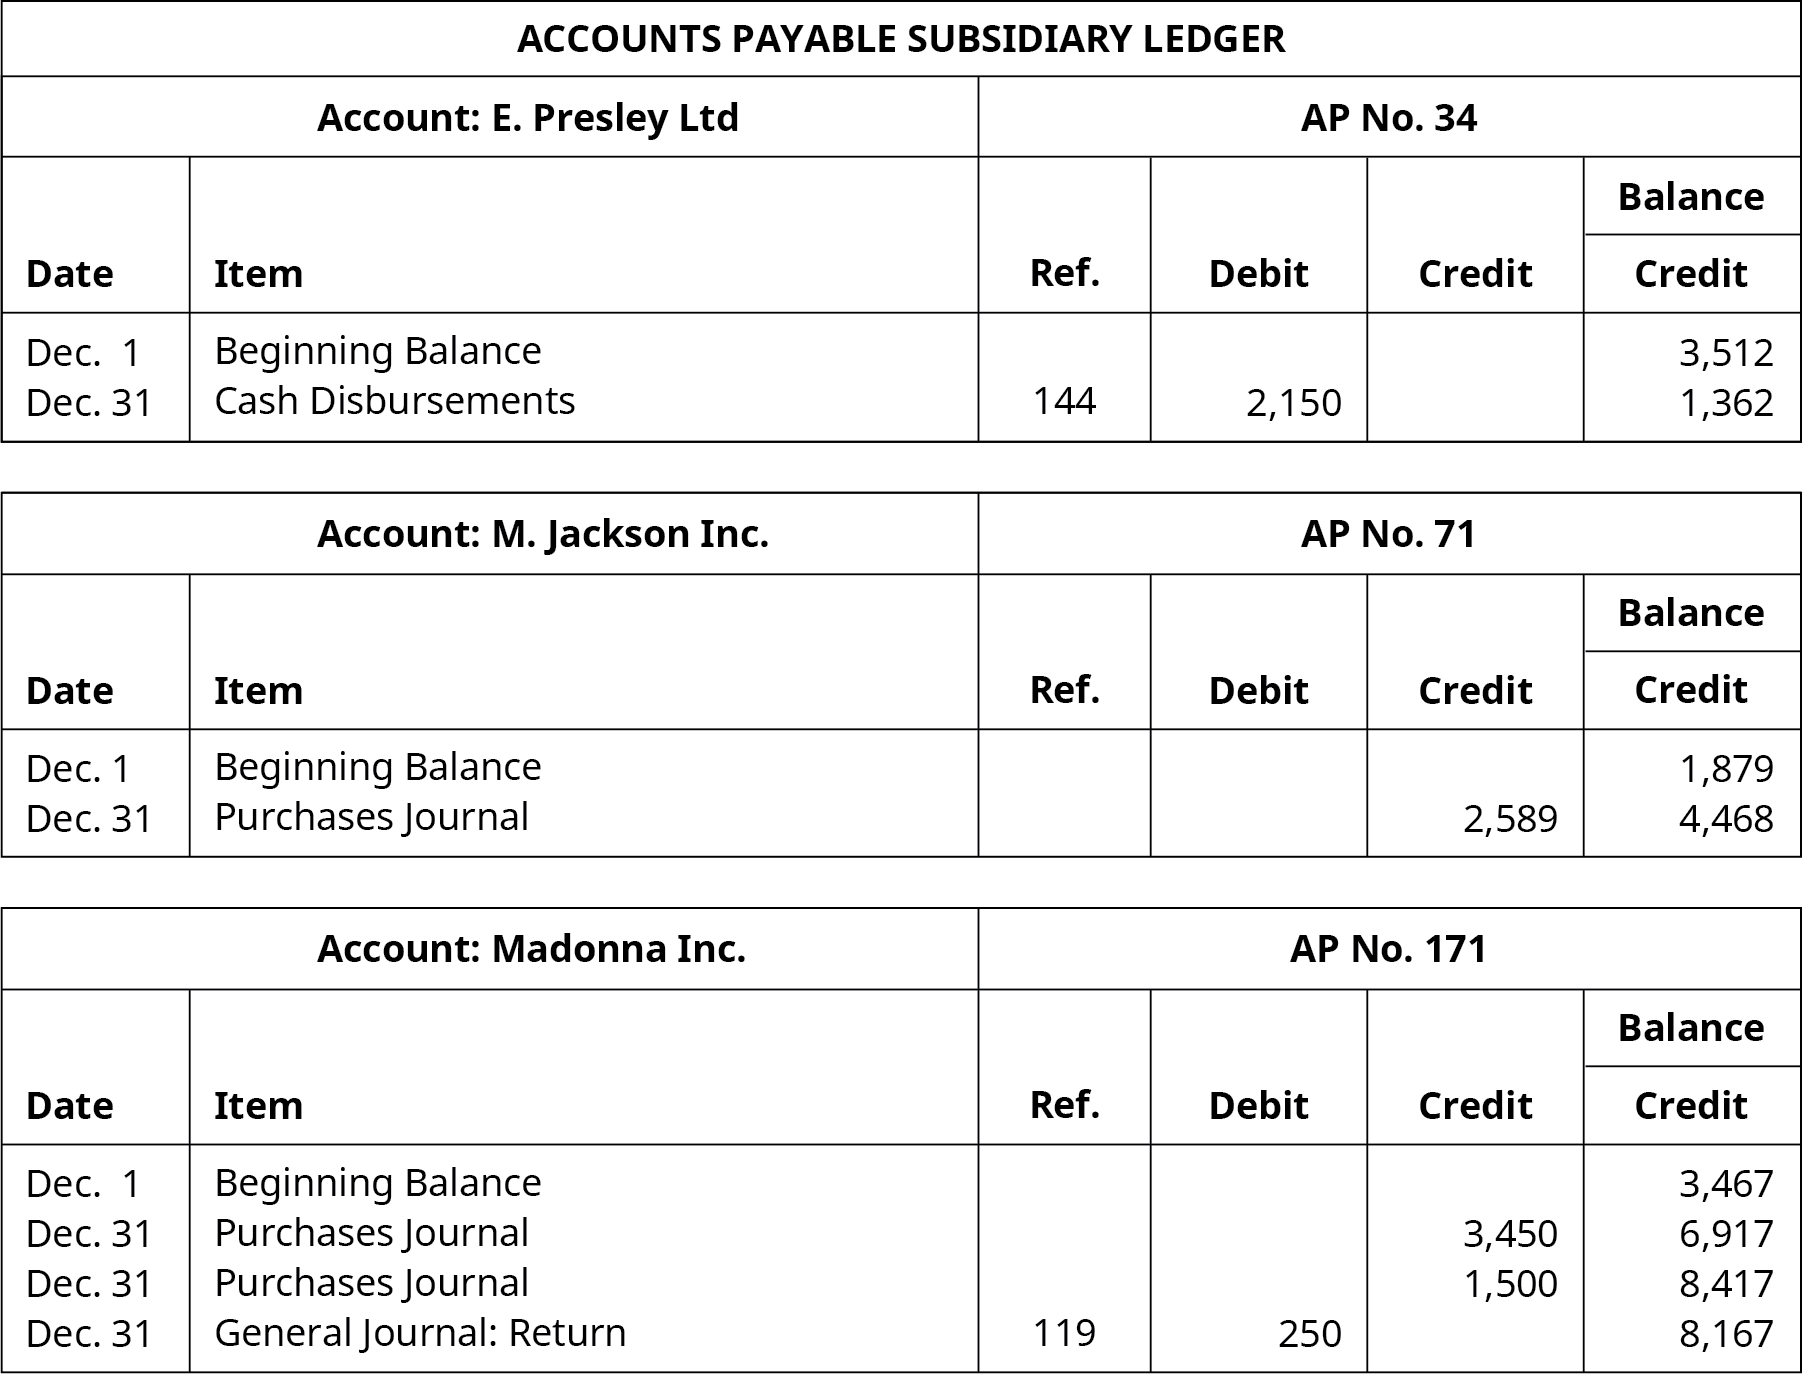 Accounts Payable Subsidiary Ledger. Six Columns, labeled left to right: Date, Item, Reference, Debit, Credit, Balance. E. Presley, Ltd. Account, AP Number 34. Line One: December 1; Beginning Balance; Blank; Blank; Blank; 3,512. Line Two: December 31; Cash Disbursements; 144; 2,150; Blank; 1,362. M. Jackson, Inc. Account, AP Number 71. Line One: December 1; Beginning Balance; Blank; Blank; Blank; 1,879. Line Two: December 31; Purchases Journal; Blank; Blank; 2,589; 4,468. Madonna, Inc. Account, AP Number 171. Line One: December 1; Beginning Balance; Blank; Blank; Blank; 3,467. Line Two: December 31; Purchases Journal; Blank; Blank; 3,450; 6,917. Line Three: December 31; Purchases Journal; Blank; Blank: 1,500; 8,417. Line Four: December 31; General Journal, Return; 119; 250; Blank; 8,167.